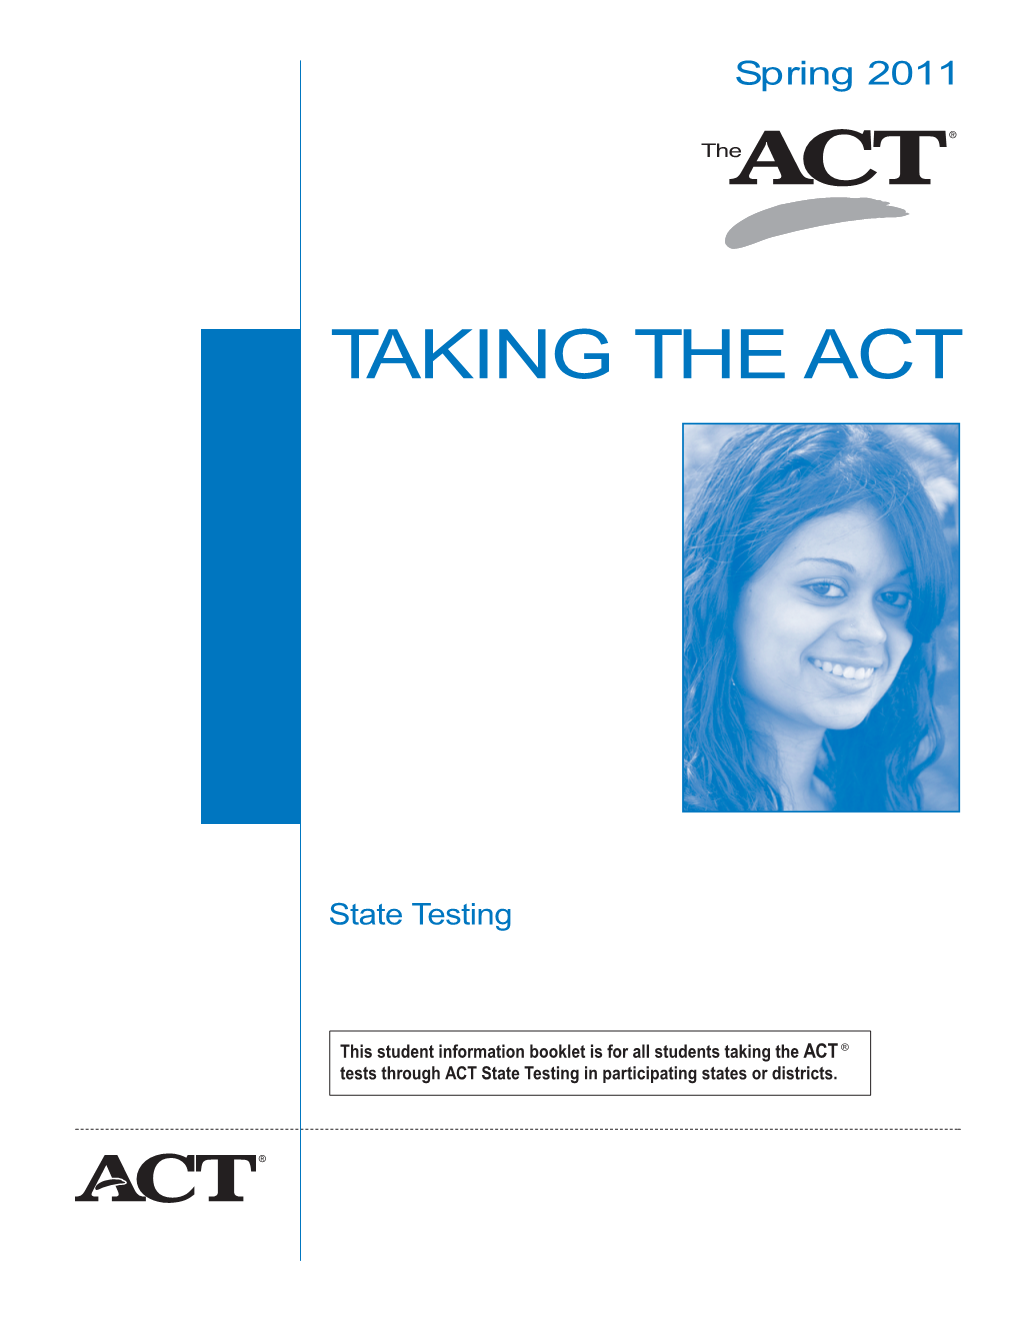 Taking the Act